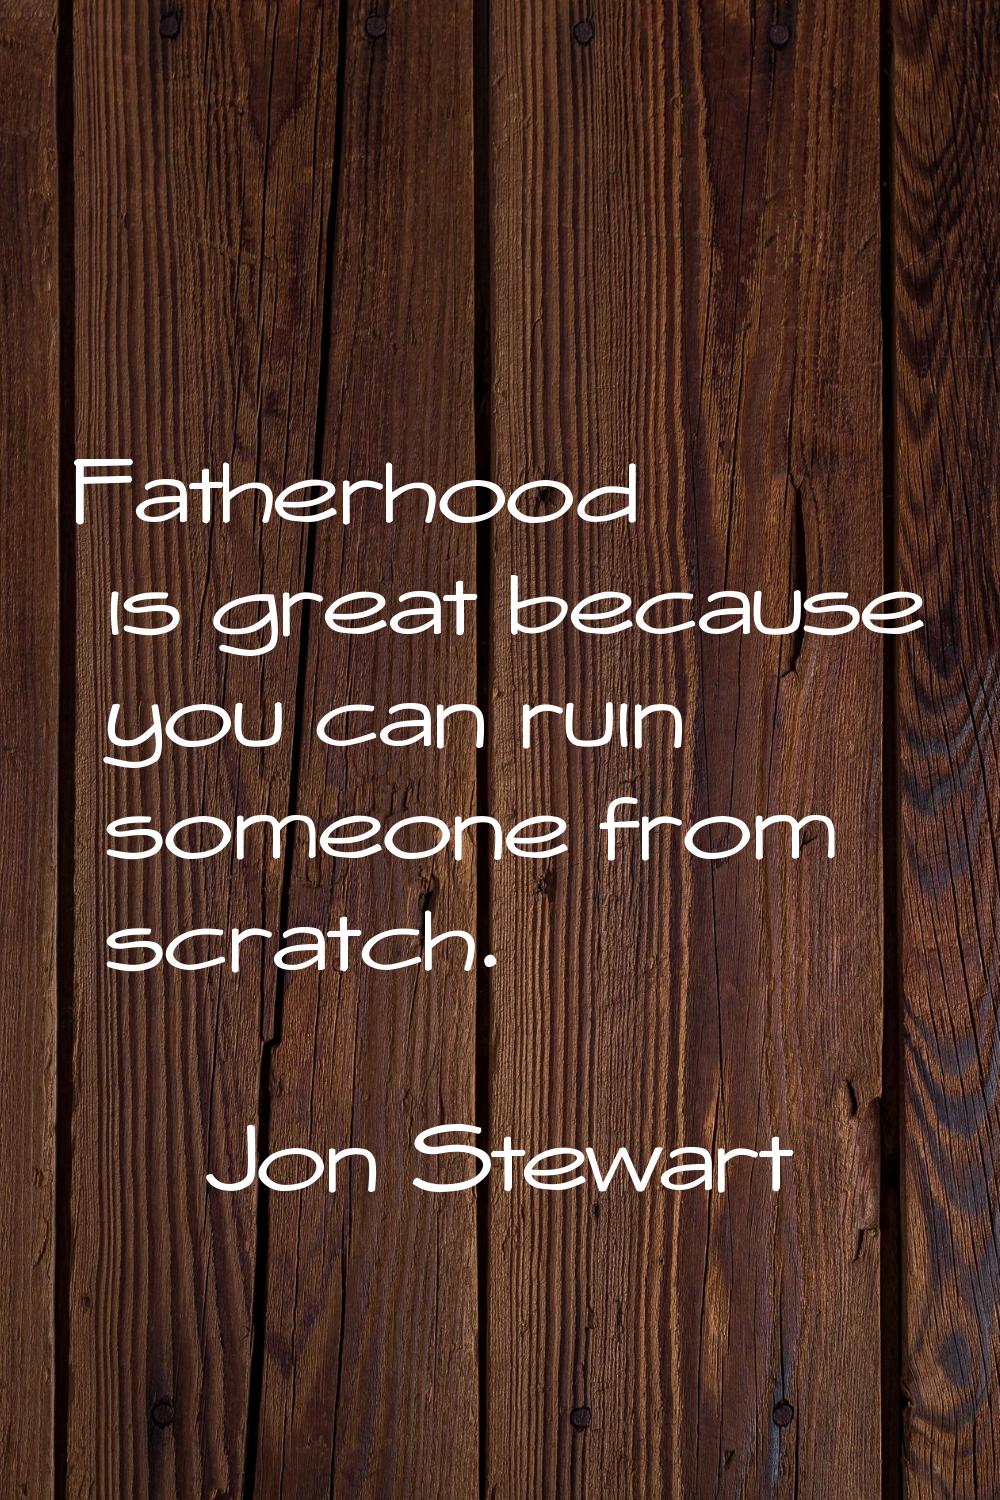 Fatherhood is great because you can ruin someone from scratch.